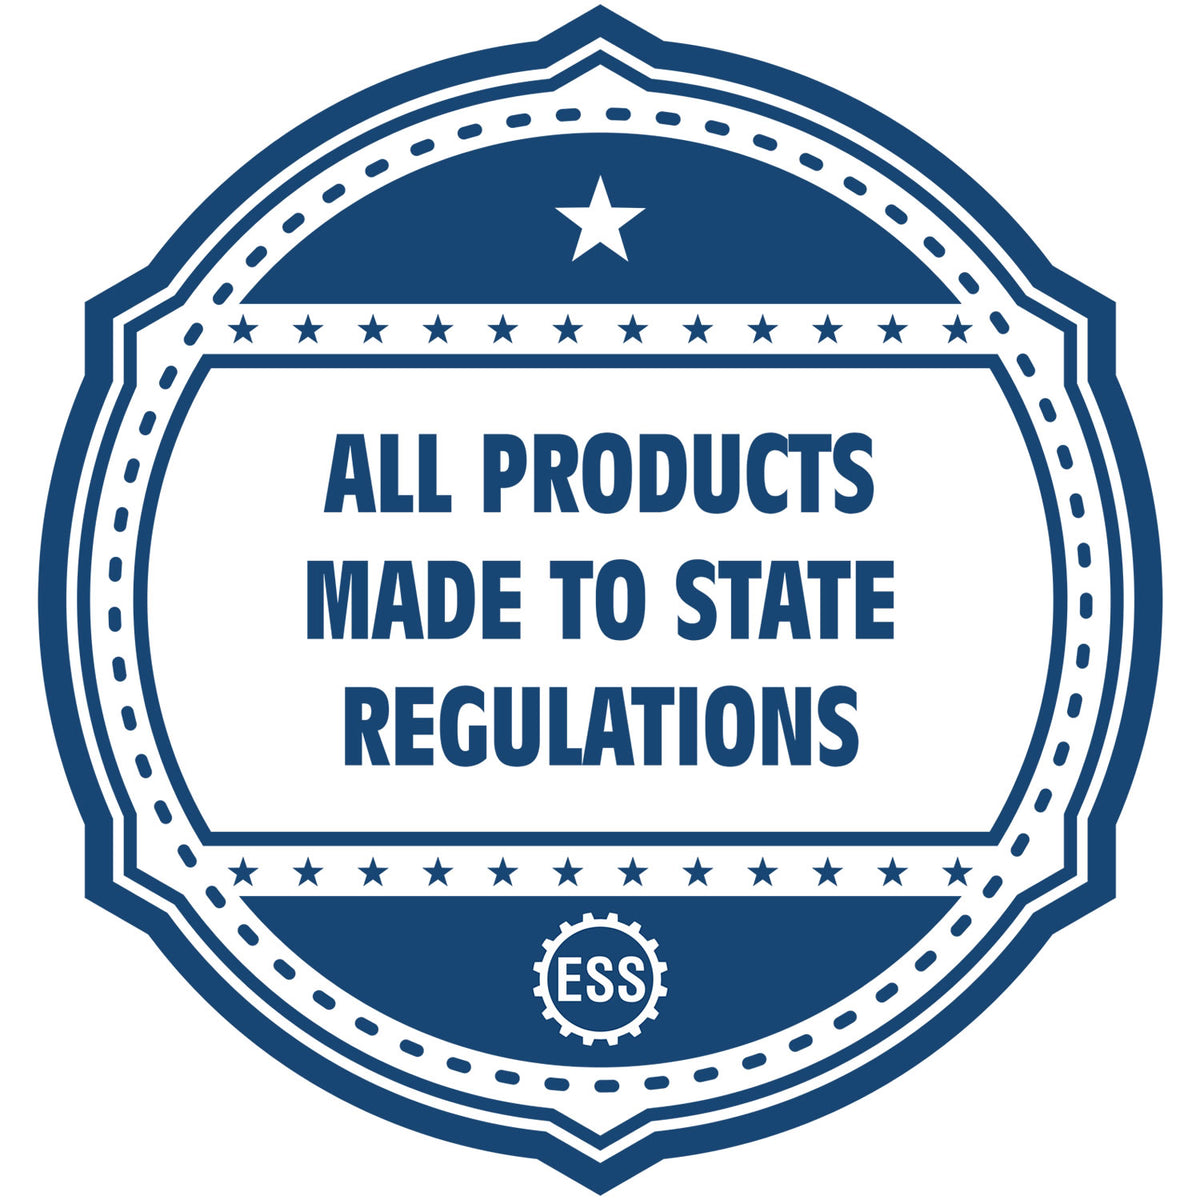 An icon or badge element for the District of Columbia Professional Engineer Seal Stamp showing that this product is made in compliance with state regulations.